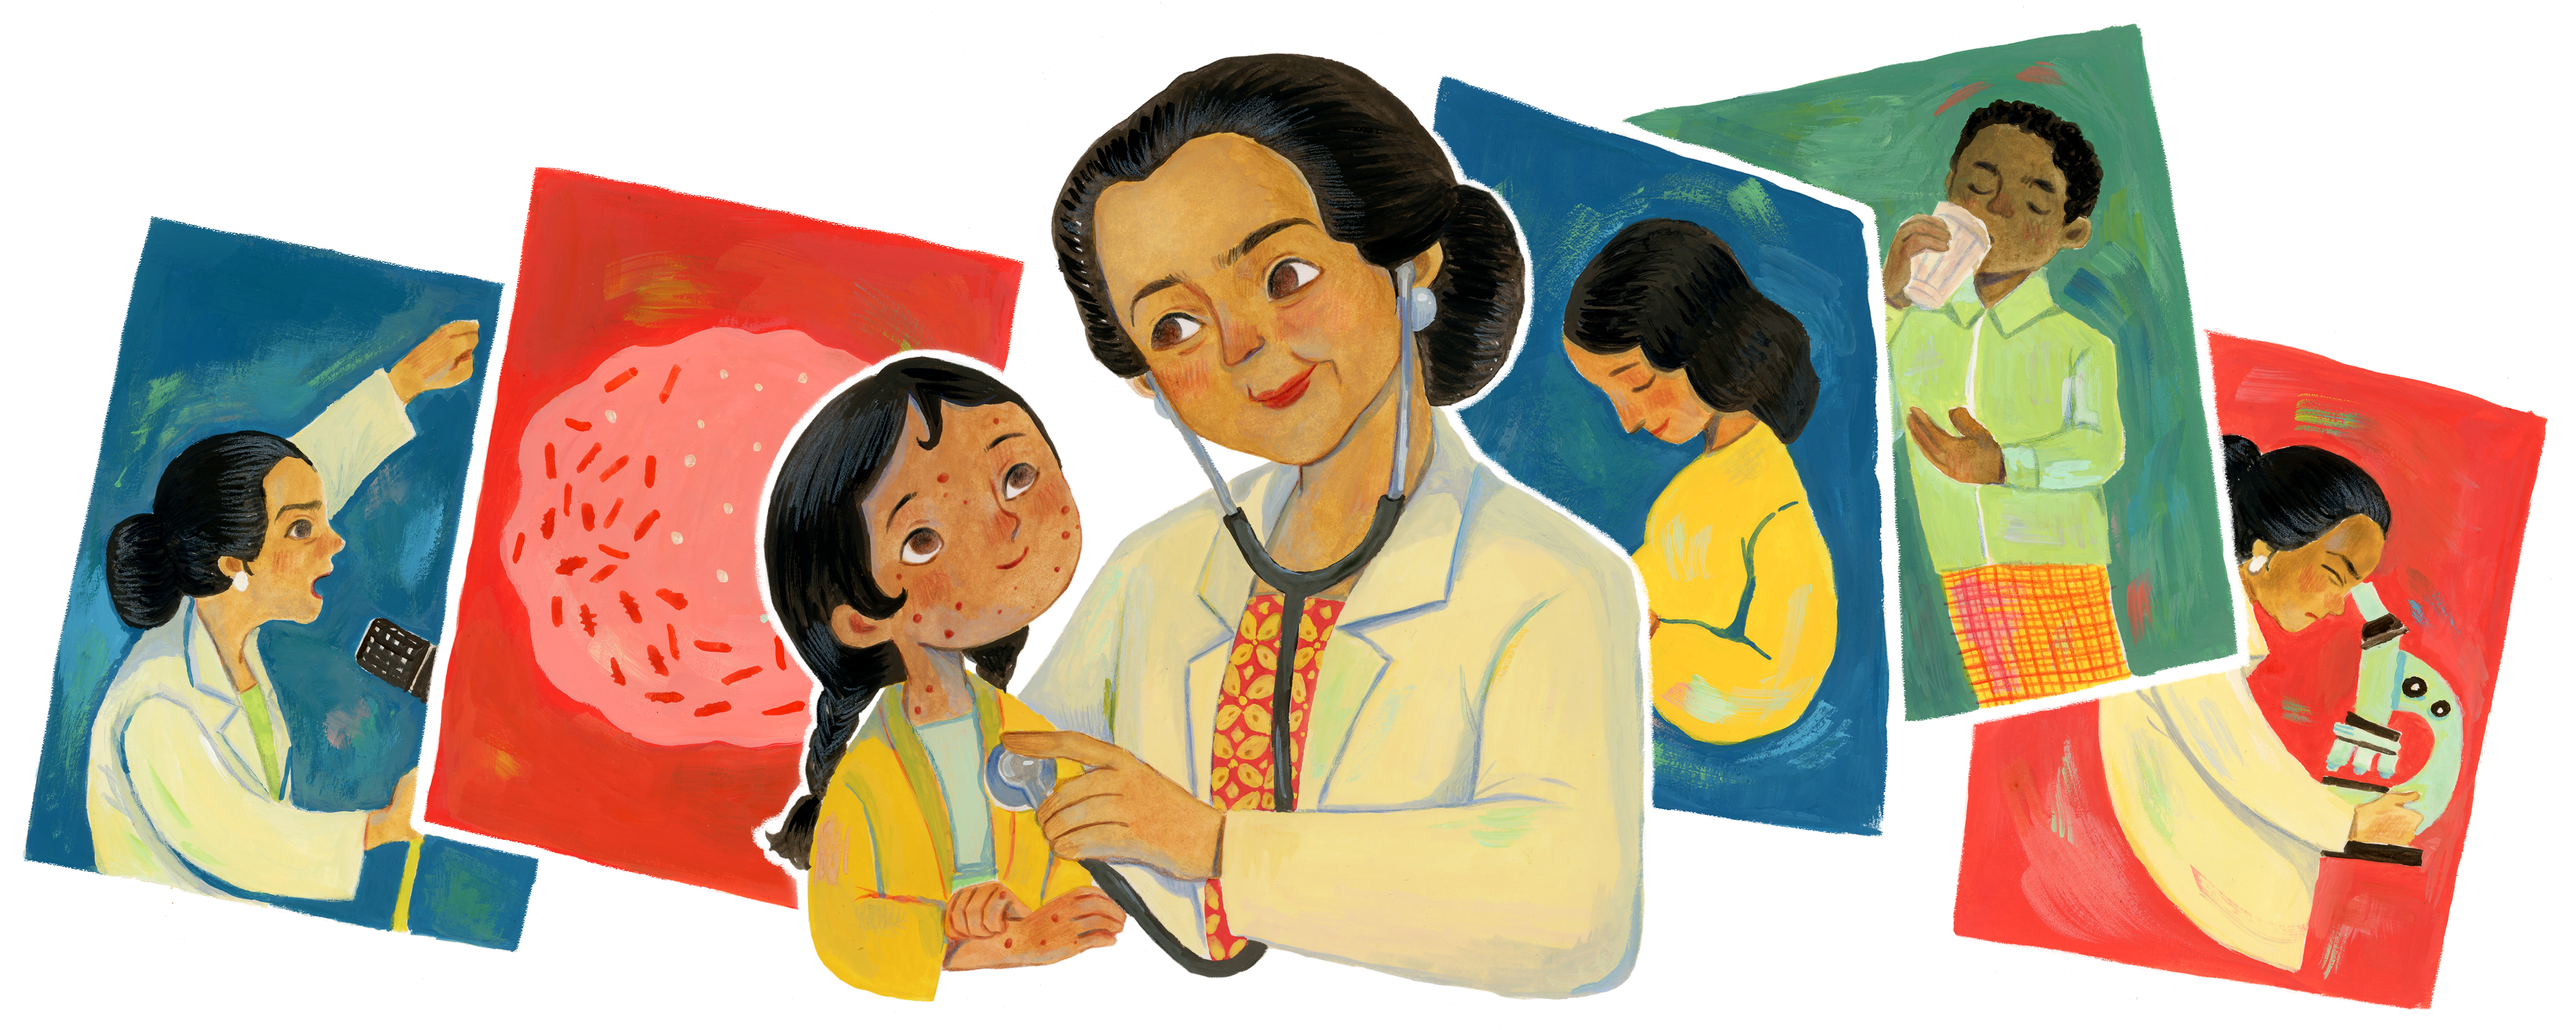 Illustration of Dr. Saroso checking the heartbeat of a child with a stethoscope. Dr. Saroso has dark hair pulled back in a low bun and is wearing a yellow and red paisley pattern shirt with a white physician's coat on top. The child is to her left and is wearing a yellow sweater and has red dots on their face which indicates they are sick. The rest of the GOOGLE logo is represented by 5 vignettes behind them. Two of the vignettes feature Dr. Saroso speaking in a microphone and looking through a microsope. The other three vignettes show a boy and girl patient and a microscopic image of a virus molecule. 